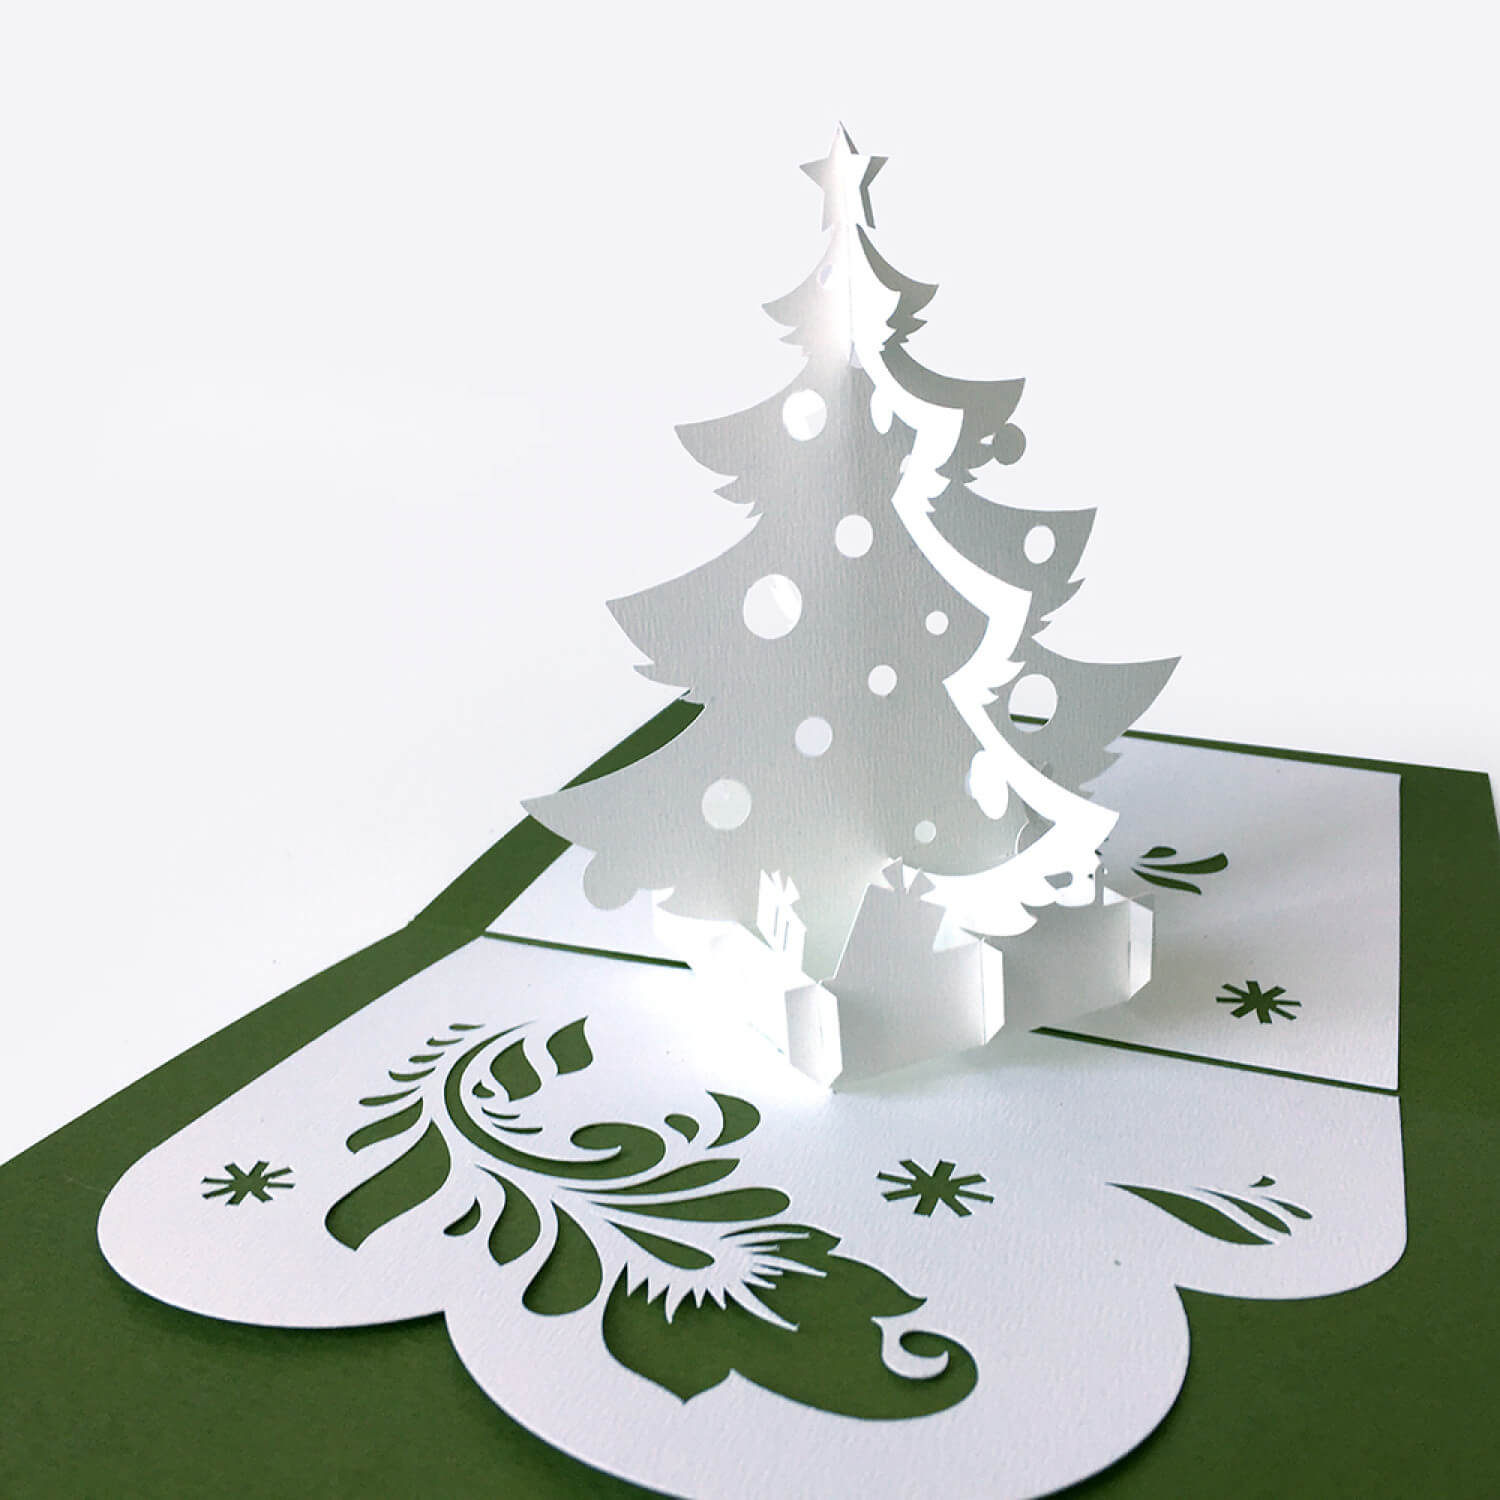 cby-handmade-christmas-greeting-card-with-paper-folded-3-d-pertaining-to-3d-christmas-tree